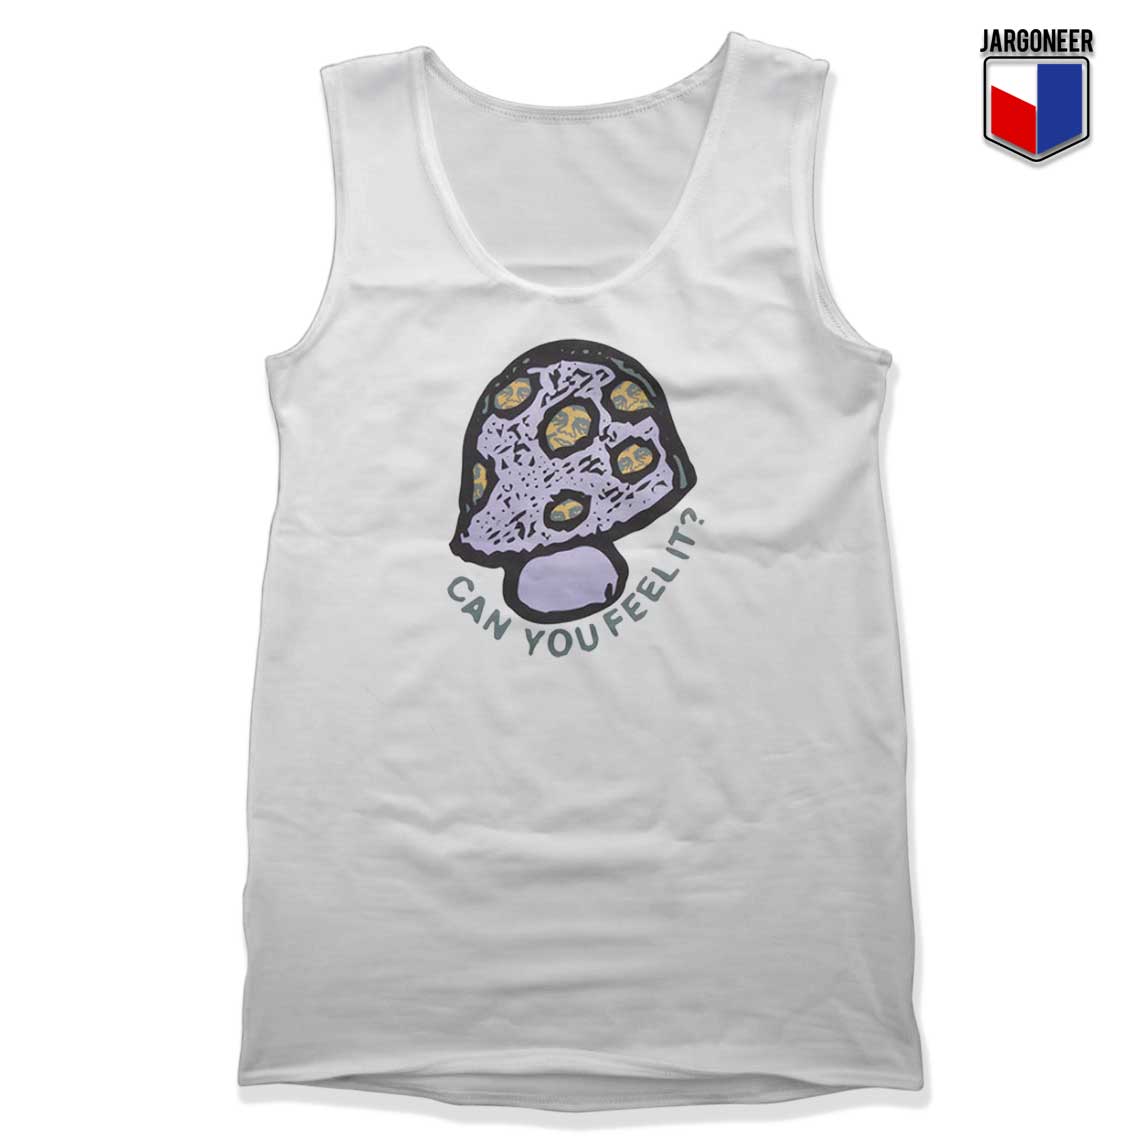 Can You Feel It Tank Top - Shop Unique Graphic Cool Shirt Designs